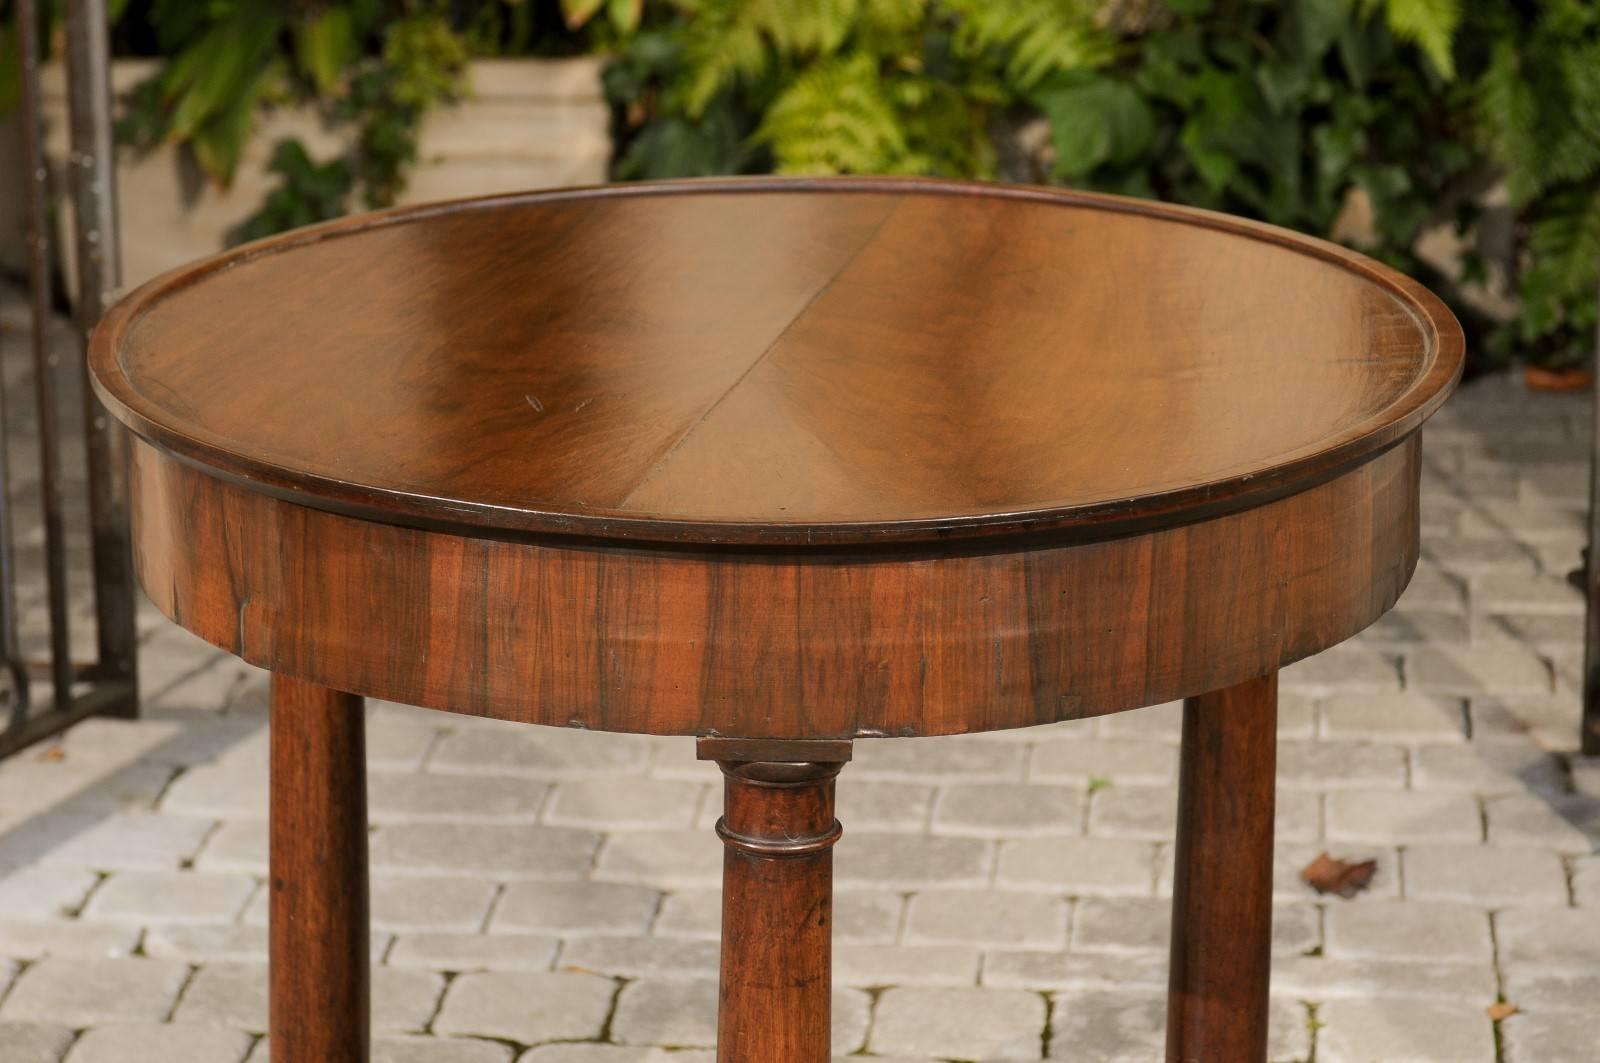 19th Century French 1870s Empire Style Walnut Round Center Table with Column-Shaped Legs